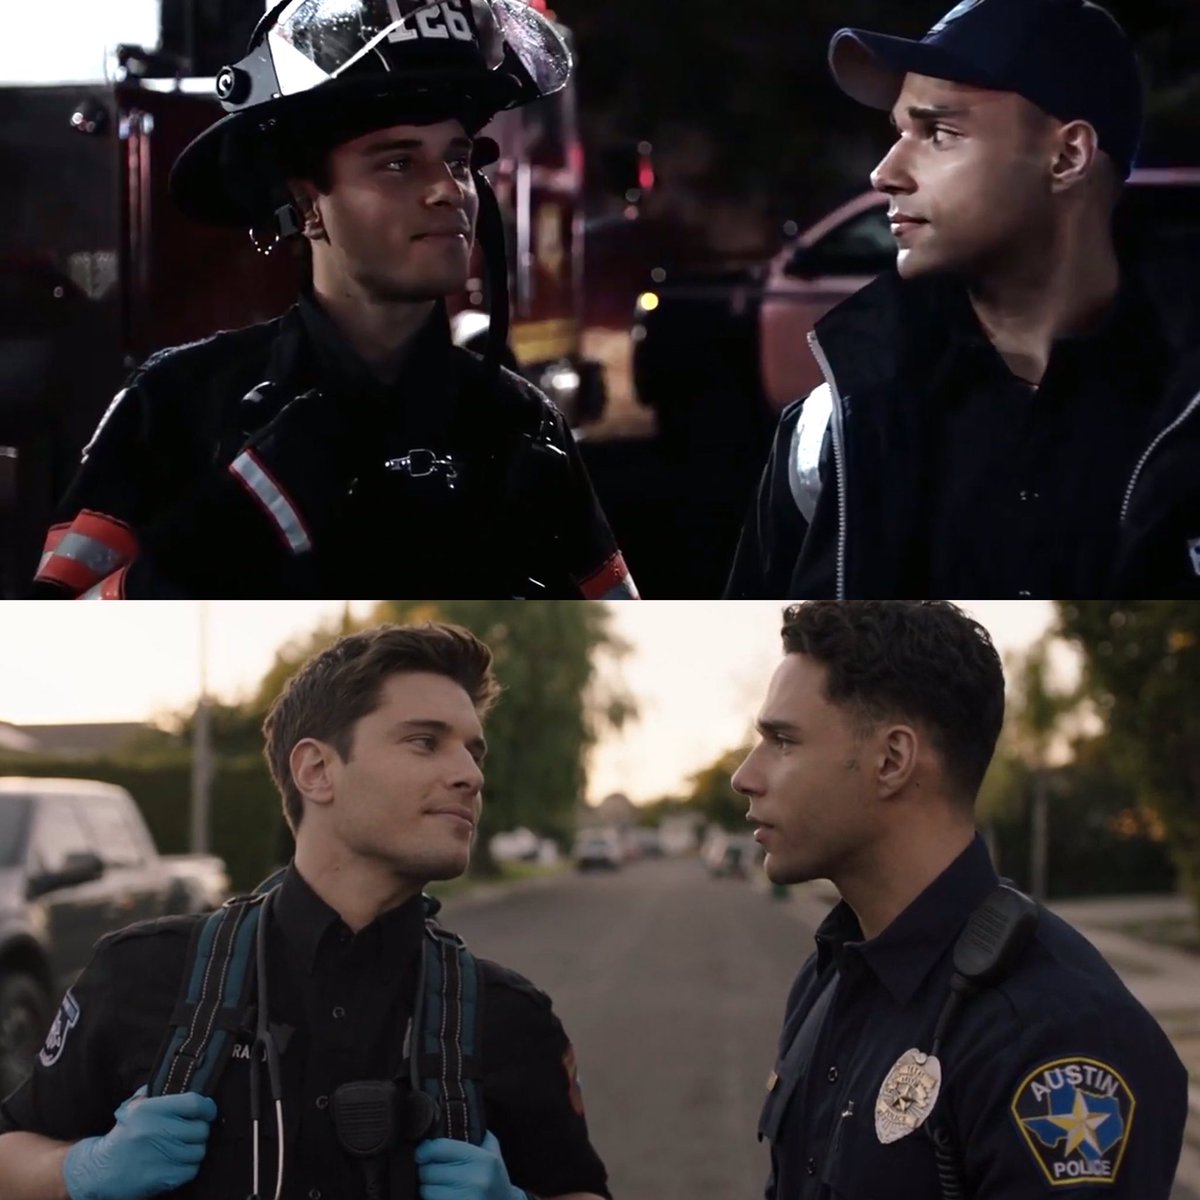 The parallel from season 1 of TK and Carlos meeting for the first time on a call 🥺🥰 to TK and Carlos being on the same call as fiancés 🙂🥺🥰. I love all the parallels LS gives us of TK and Carlos 🥺🥰 #Tarlos #911LoneStar